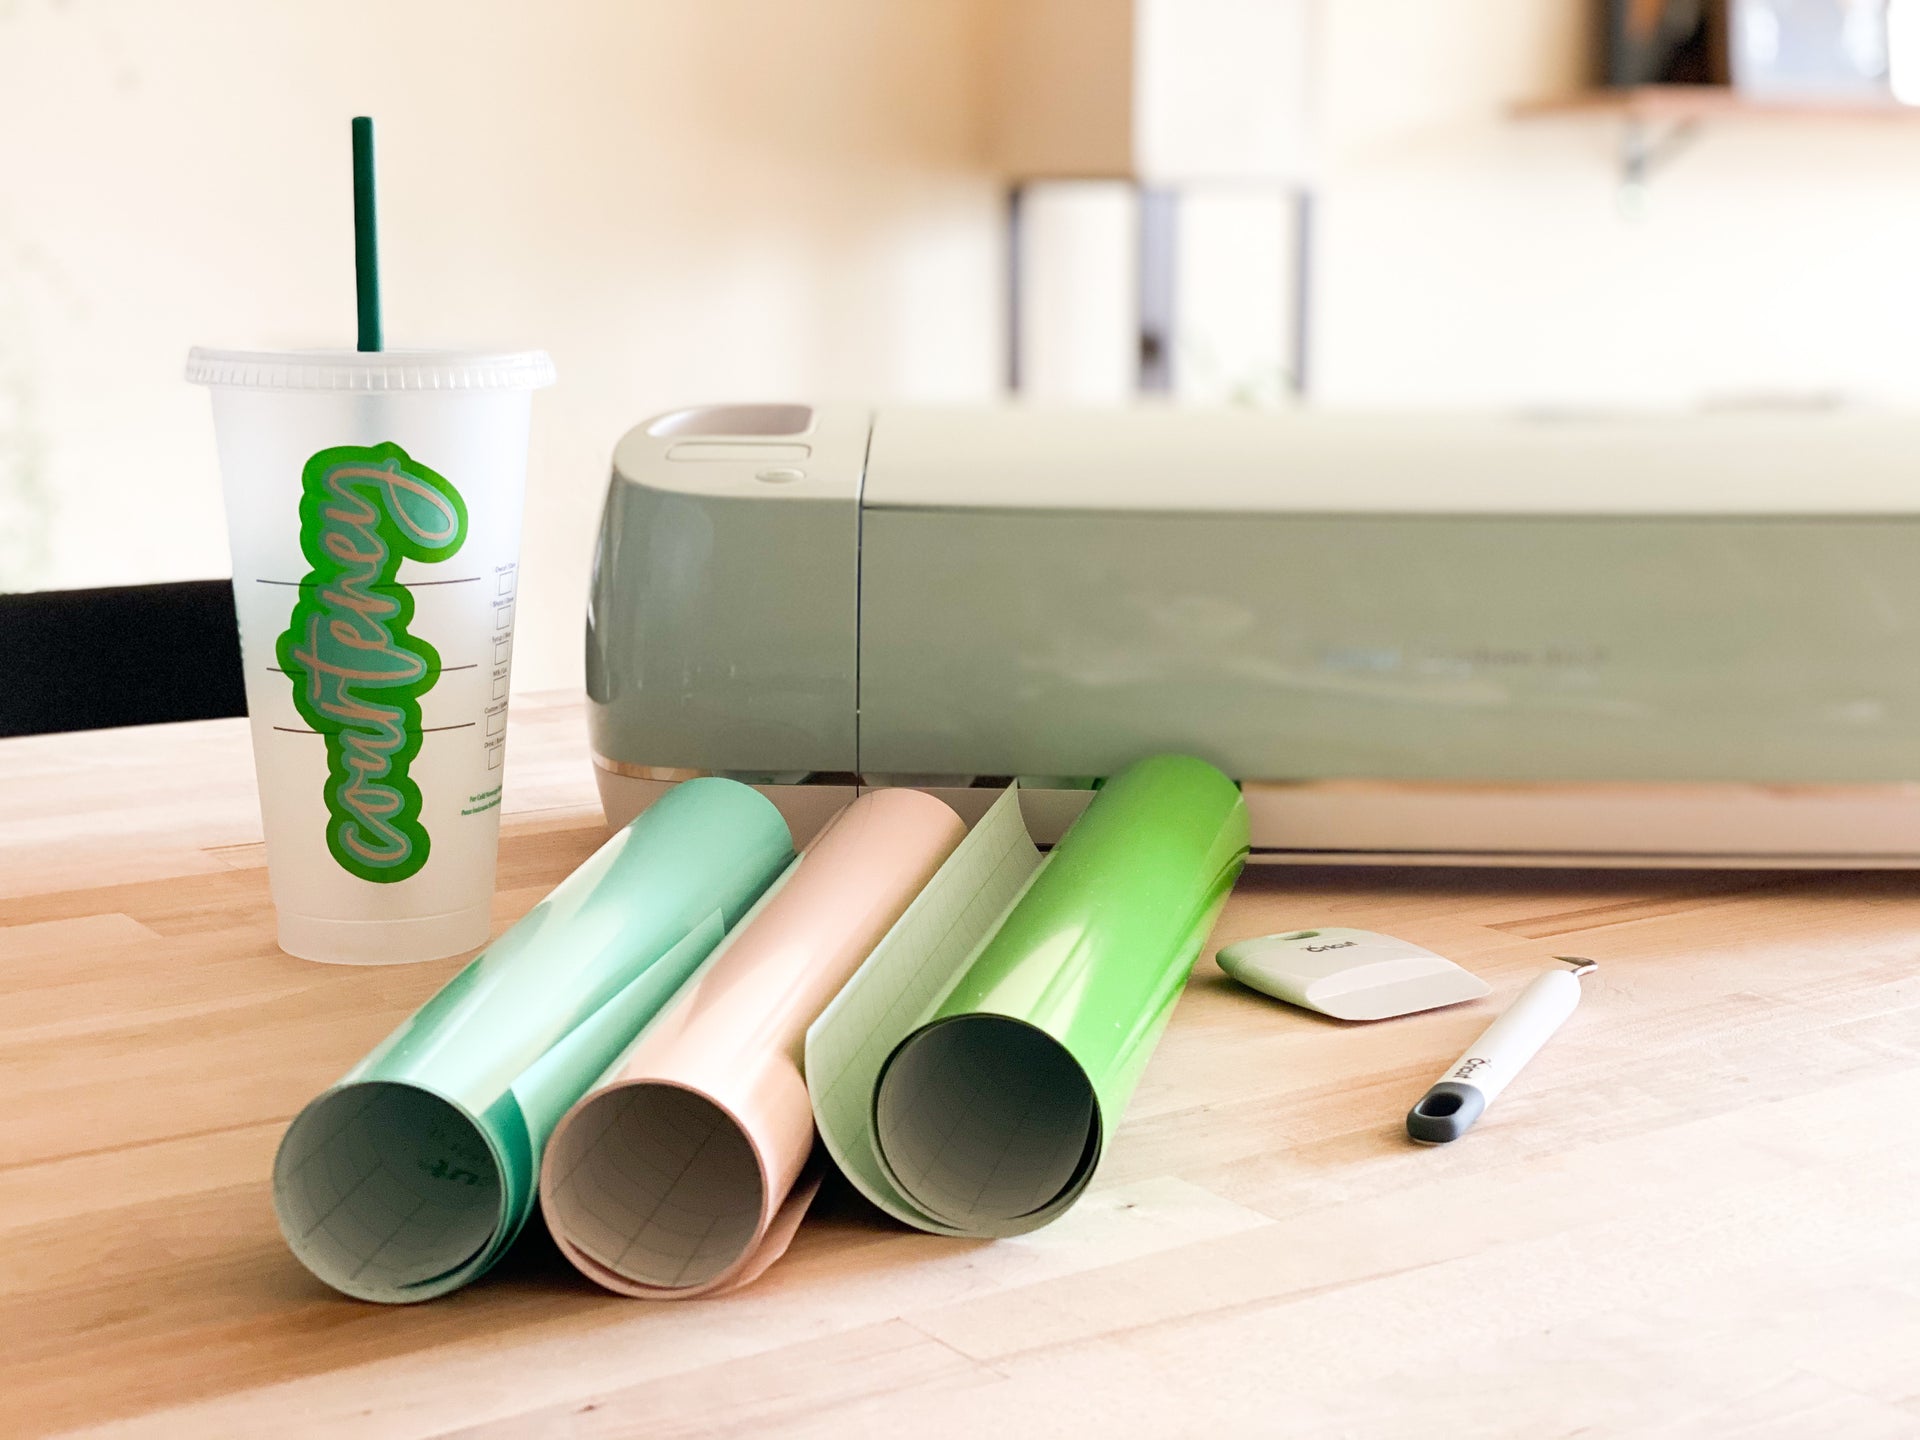 All About Cricut Access - Is It Right For You?